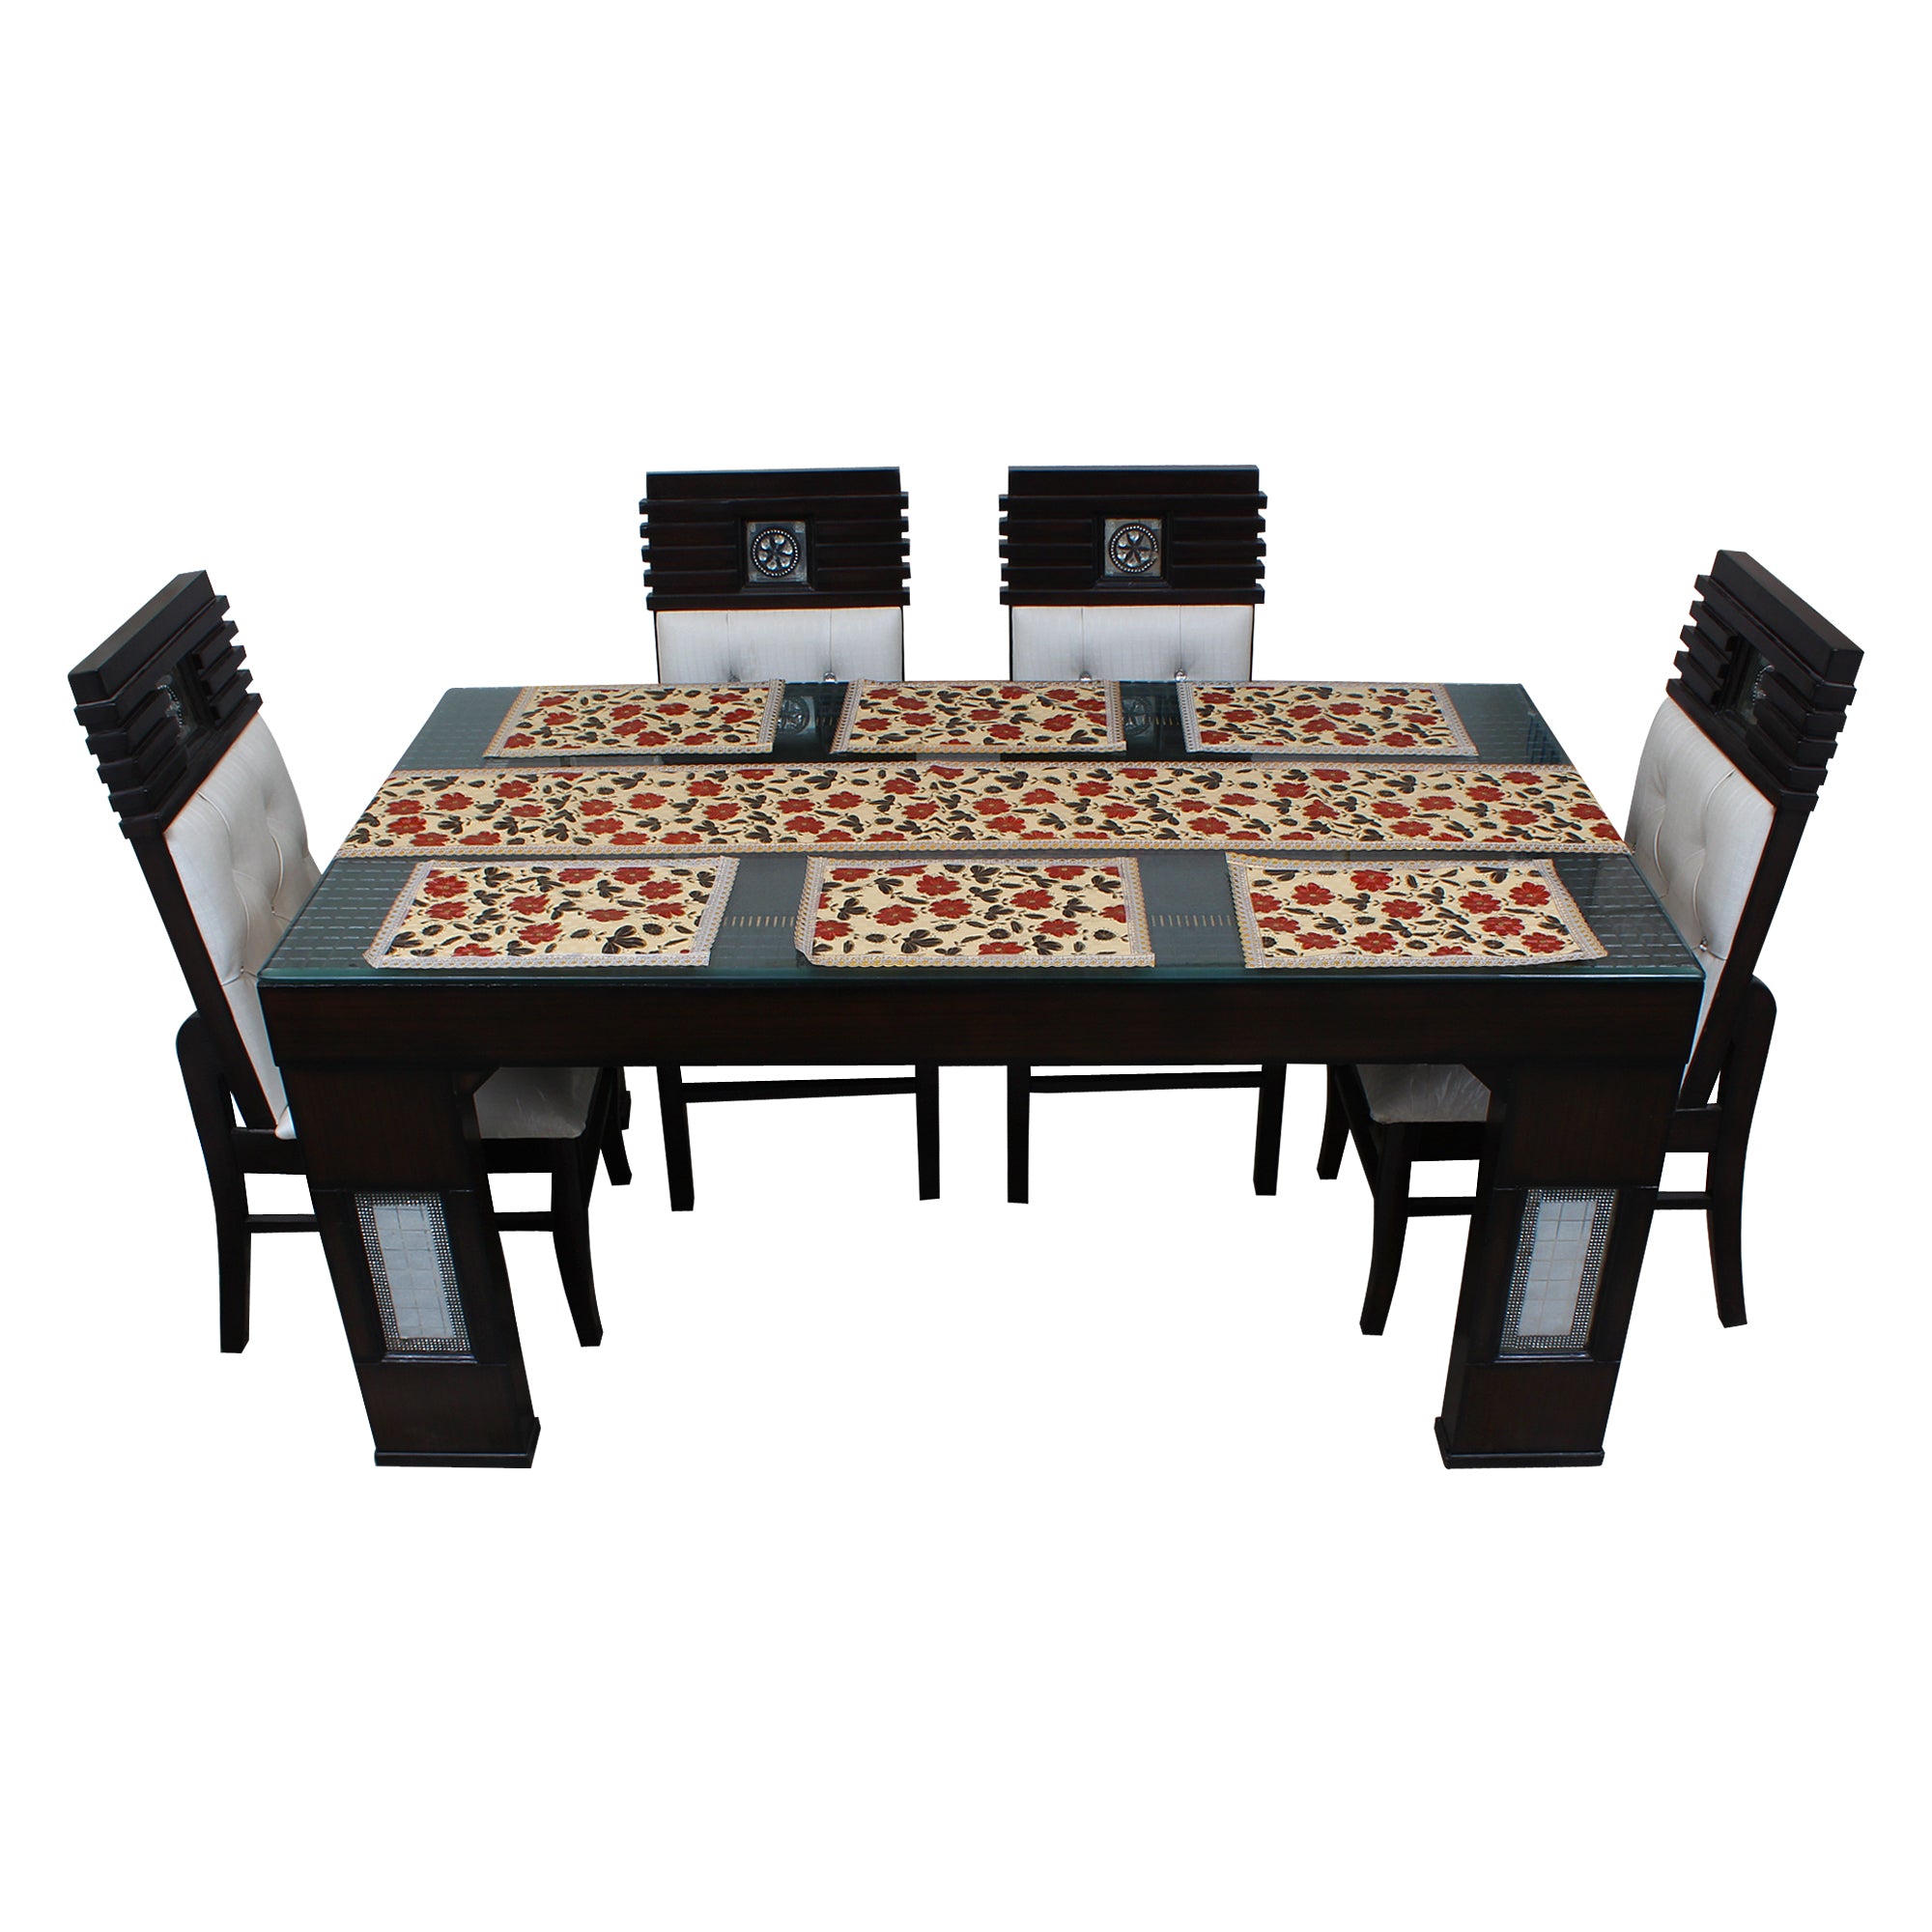 Waterproof & Dustproof Dining Table Runner With 6 Placemats, SA50 - Dream Care Furnishings Private Limited